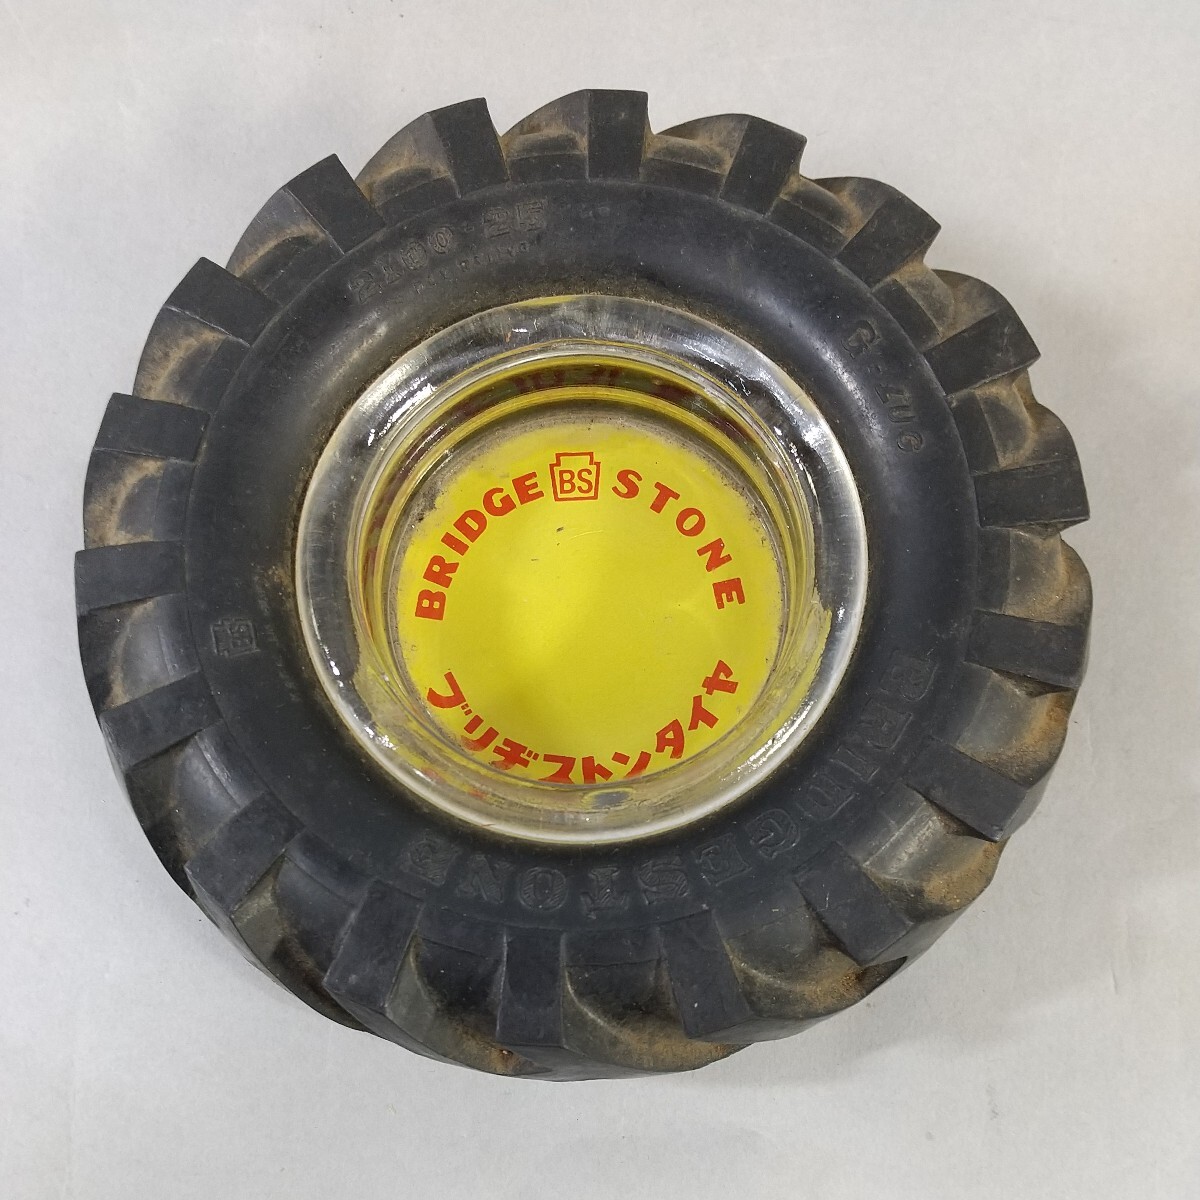 9838# including in a package NG old car Bridgestone tire 2100-25/G-LUG ashtray store .. goods not for sale Showa Retro american miscellaneous goods Bridgestone diameter 16.